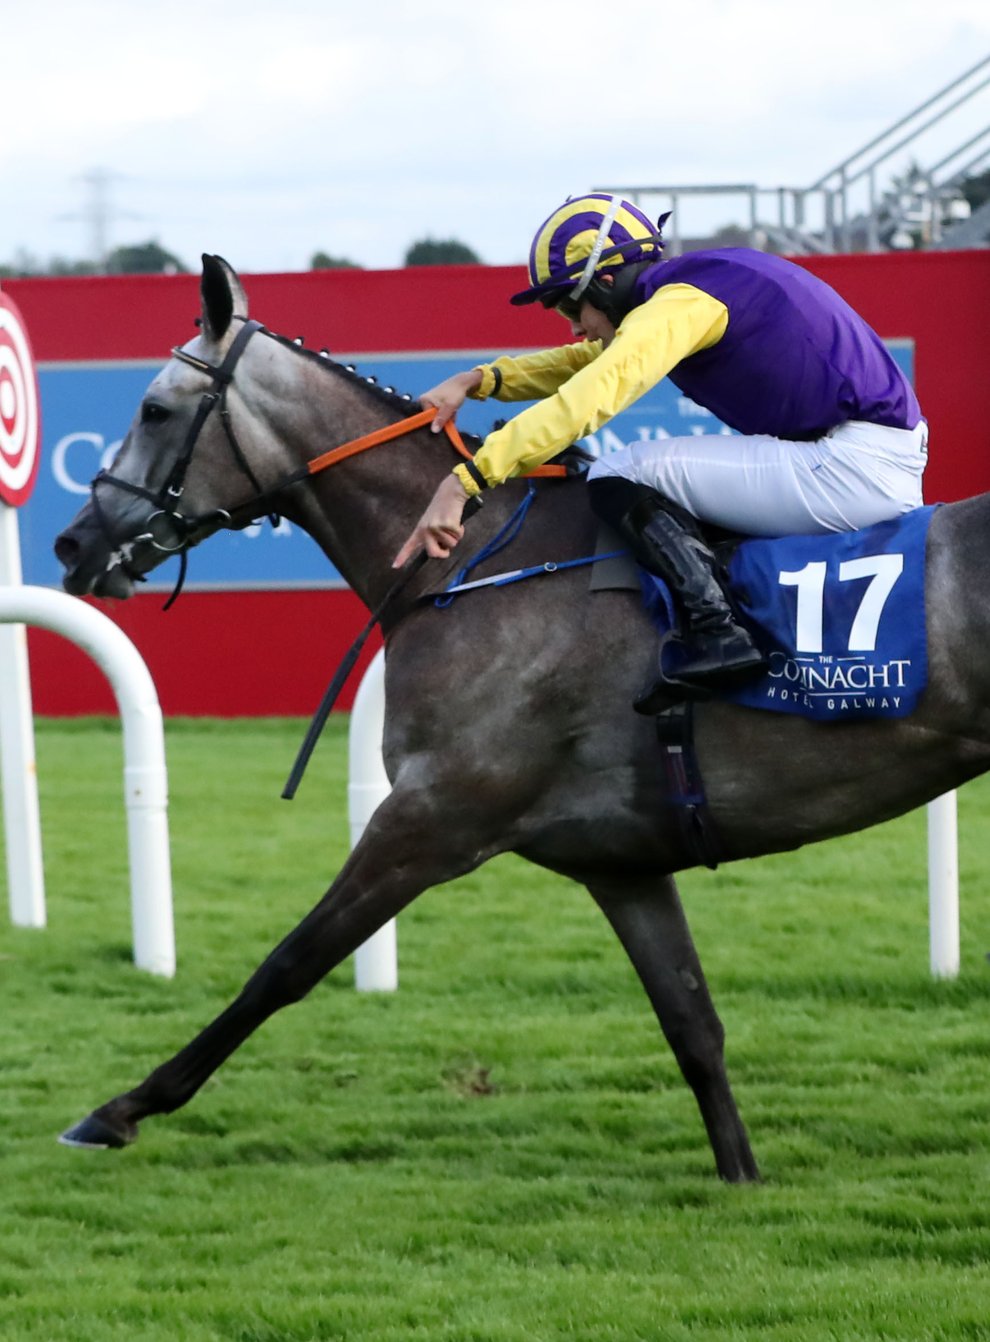 Princess Zoe is likely to skip the Doncaster Cup and go straight to ParisLongchamp (PA)